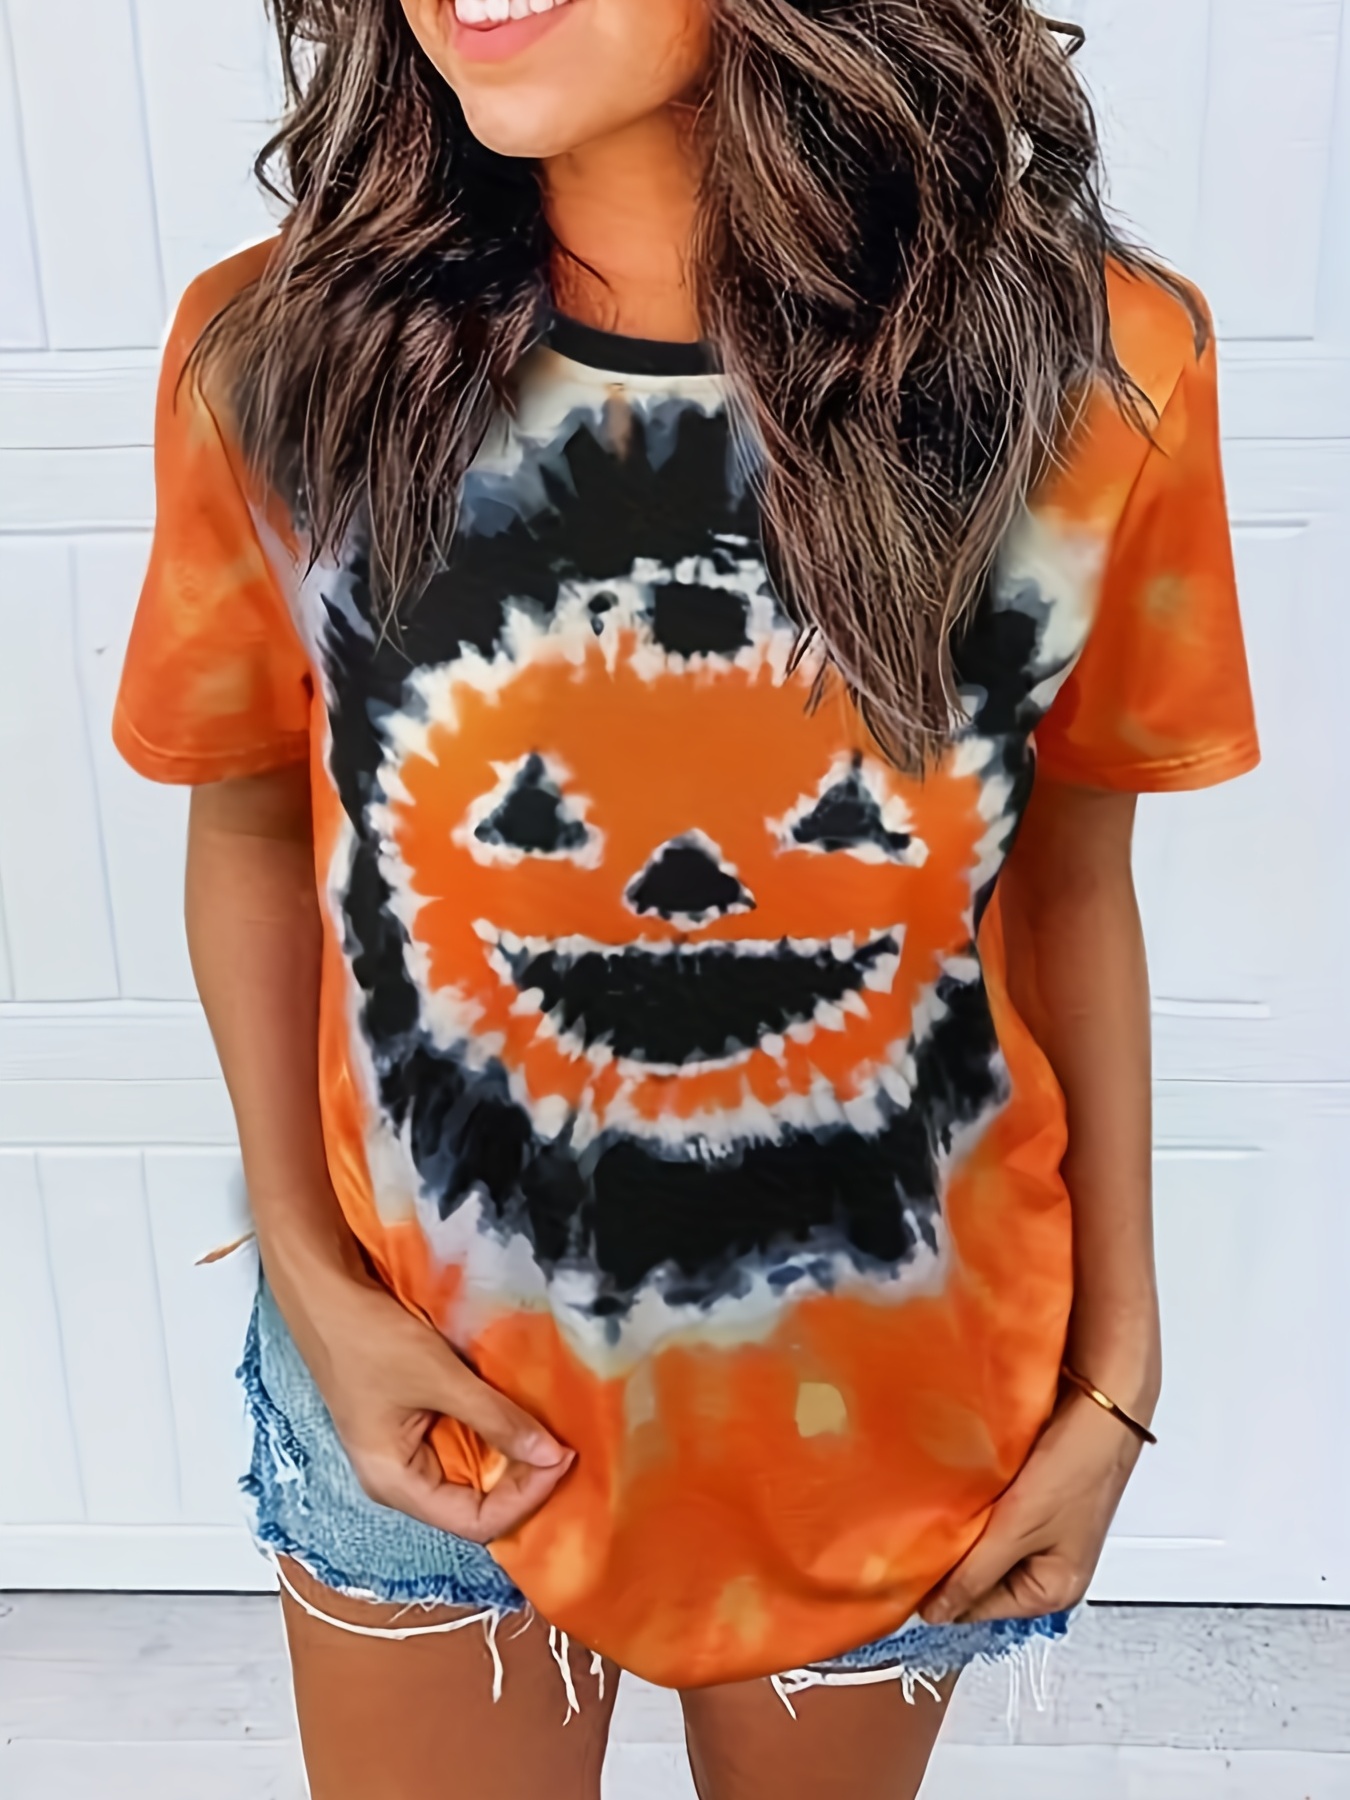 Winter Savings Clearance!YANHAIGONG Womens Summer Clearance Clothes Women's  Casual Halloween Cobwed Print 3/4 Sleeves Round Neck Top Funny Loose  Fitting Halloween Shirt Womens Graphic Tees 